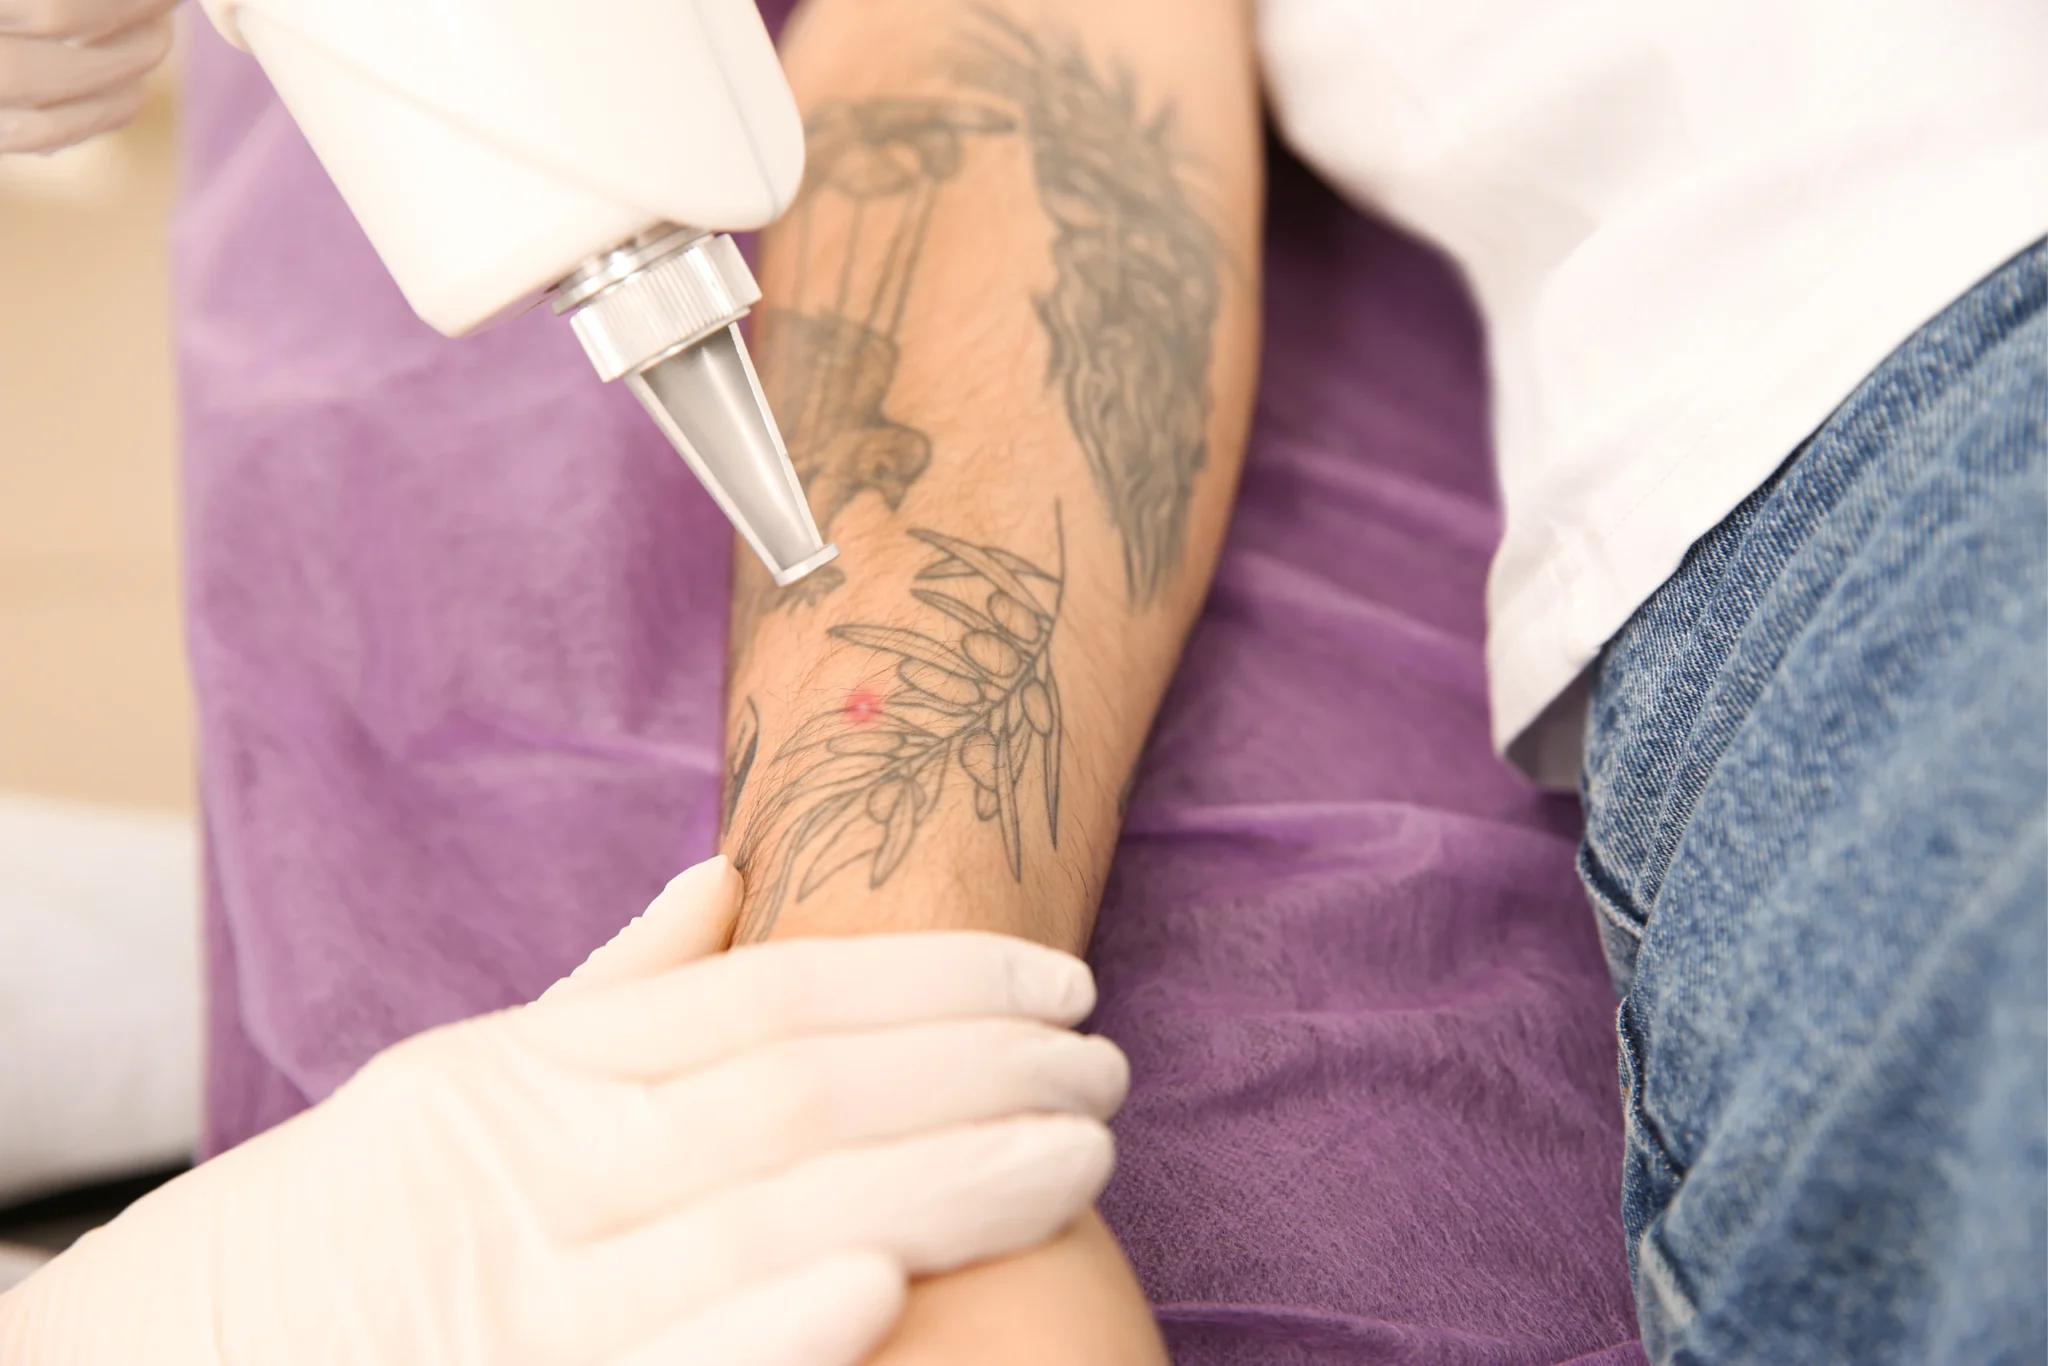 a tattoo is removing from the shoulder with the help of laser machine